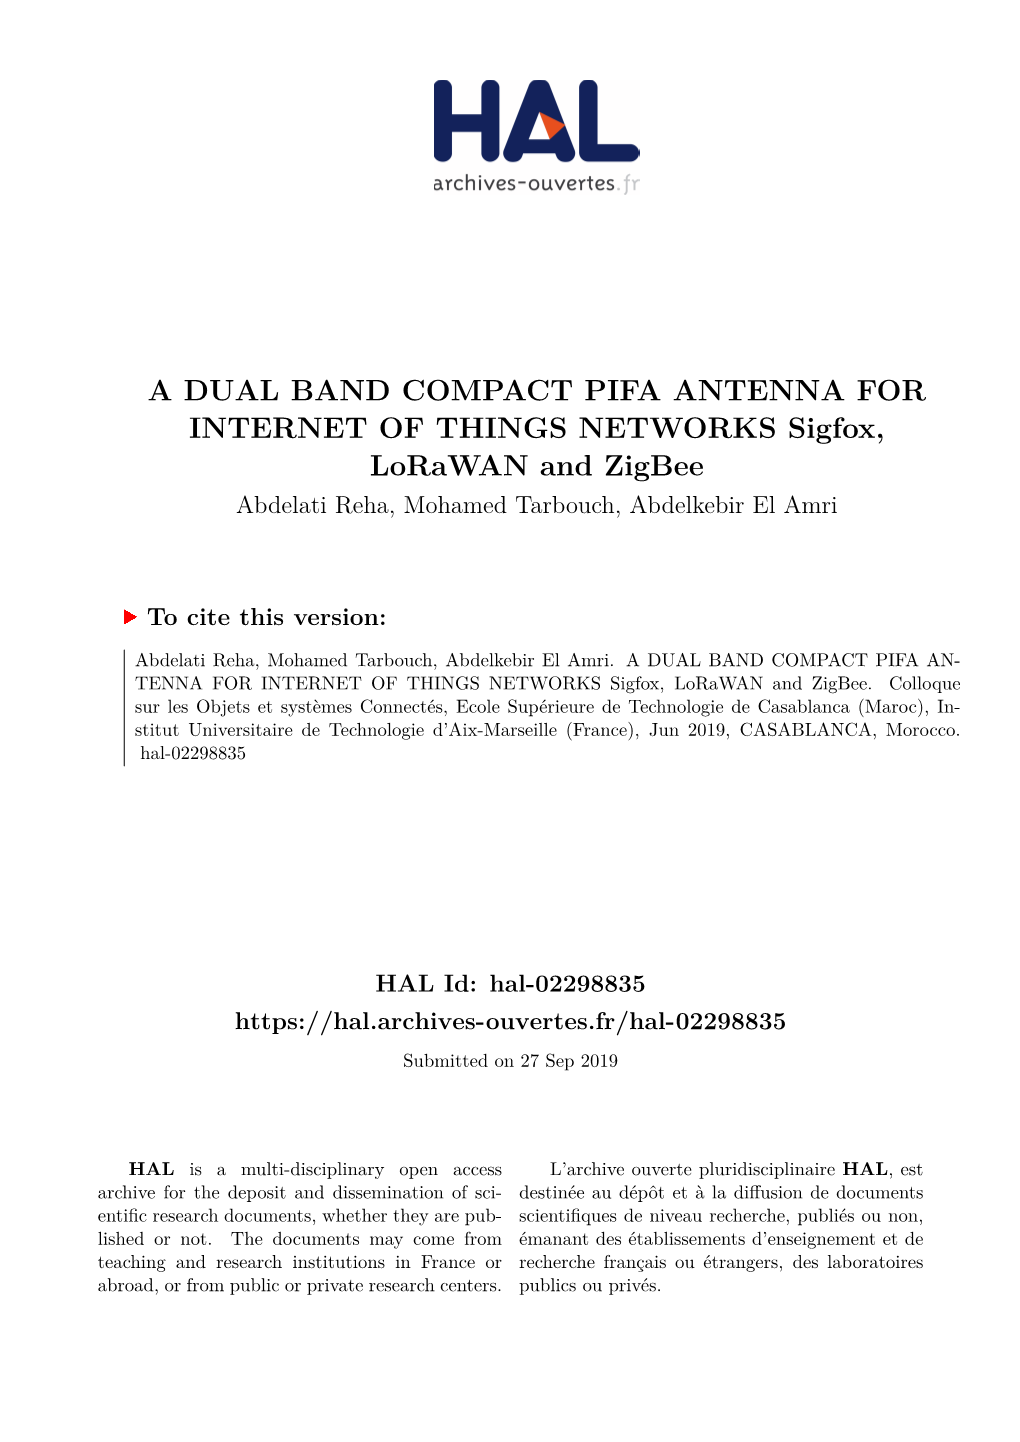 A DUAL BAND COMPACT PIFA ANTENNA for INTERNET of THINGS NETWORKS Sigfox, Lorawan and Zigbee Abdelati Reha, Mohamed Tarbouch, Abdelkebir El Amri